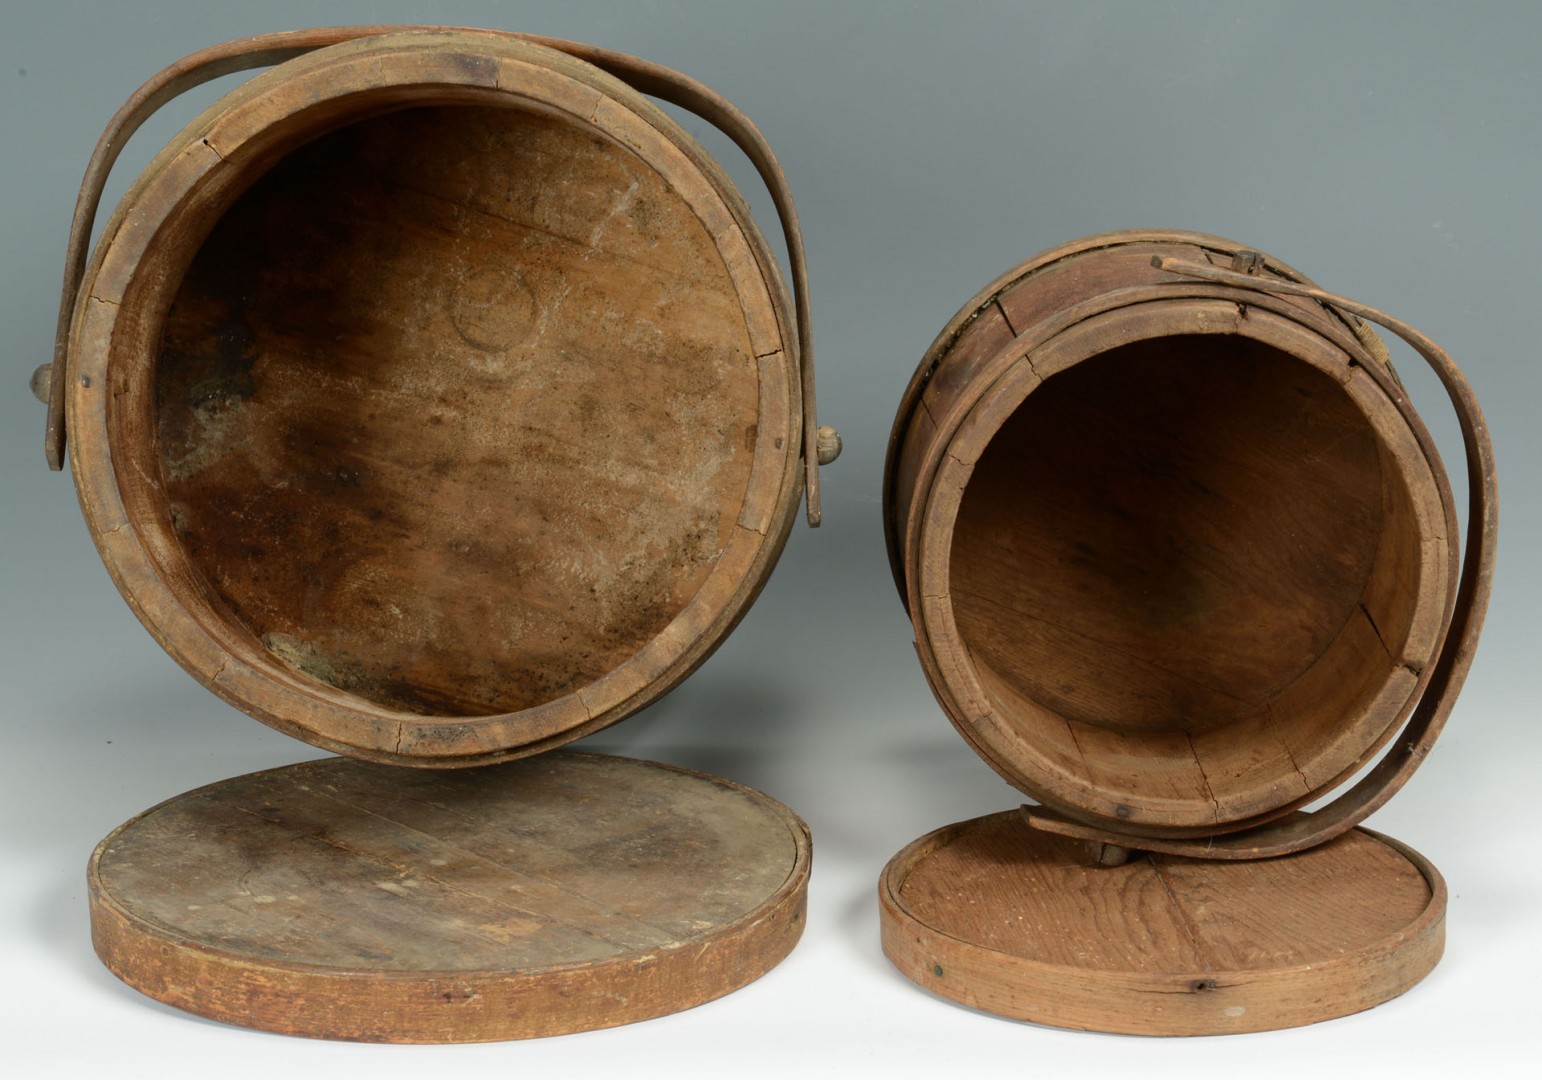 Lot 537: Grouping of Shaker Boxes, Firkins, Treenware